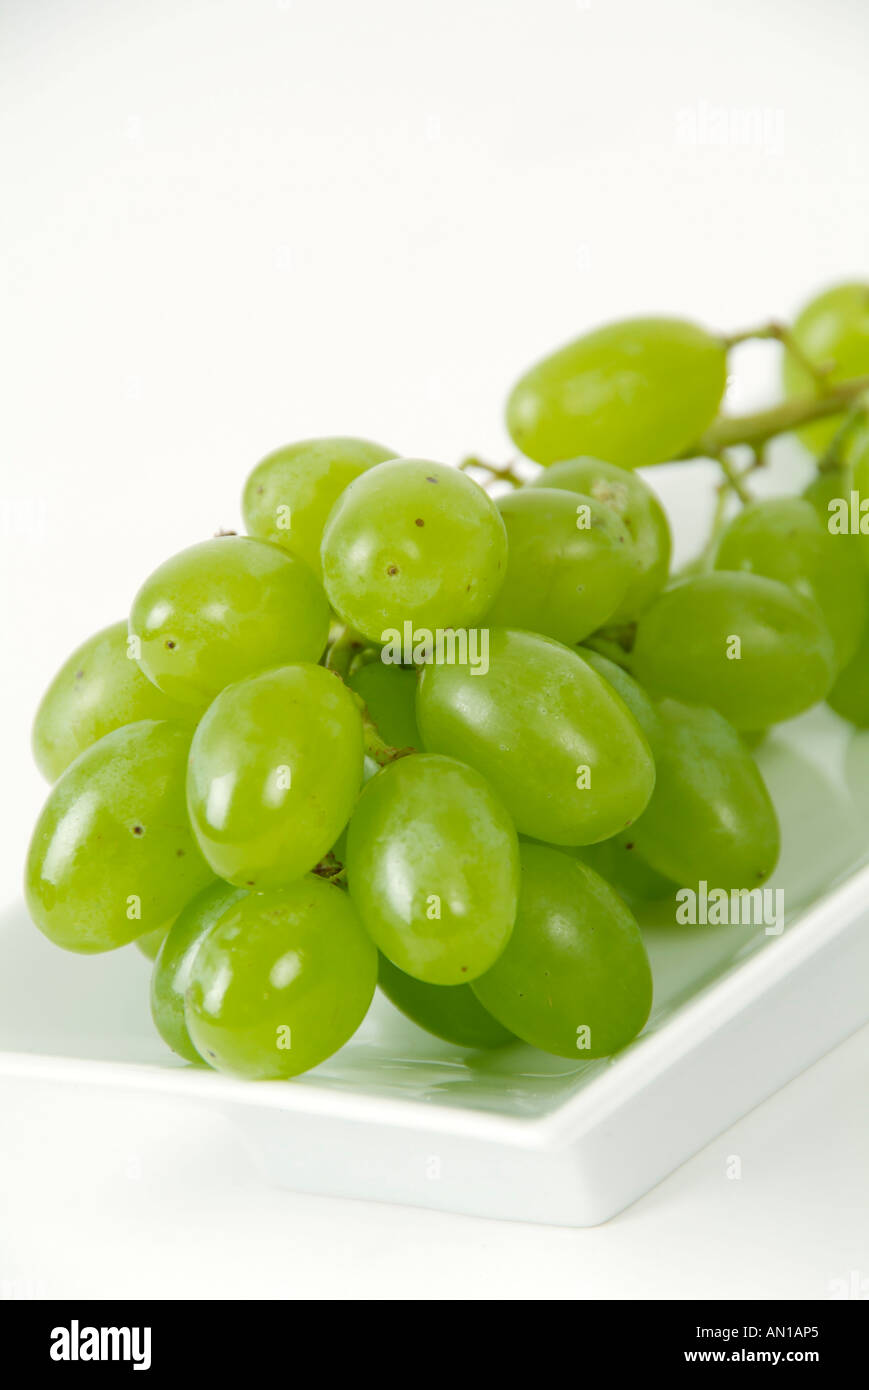 a bunch of green grapes, fruits Stock Photo